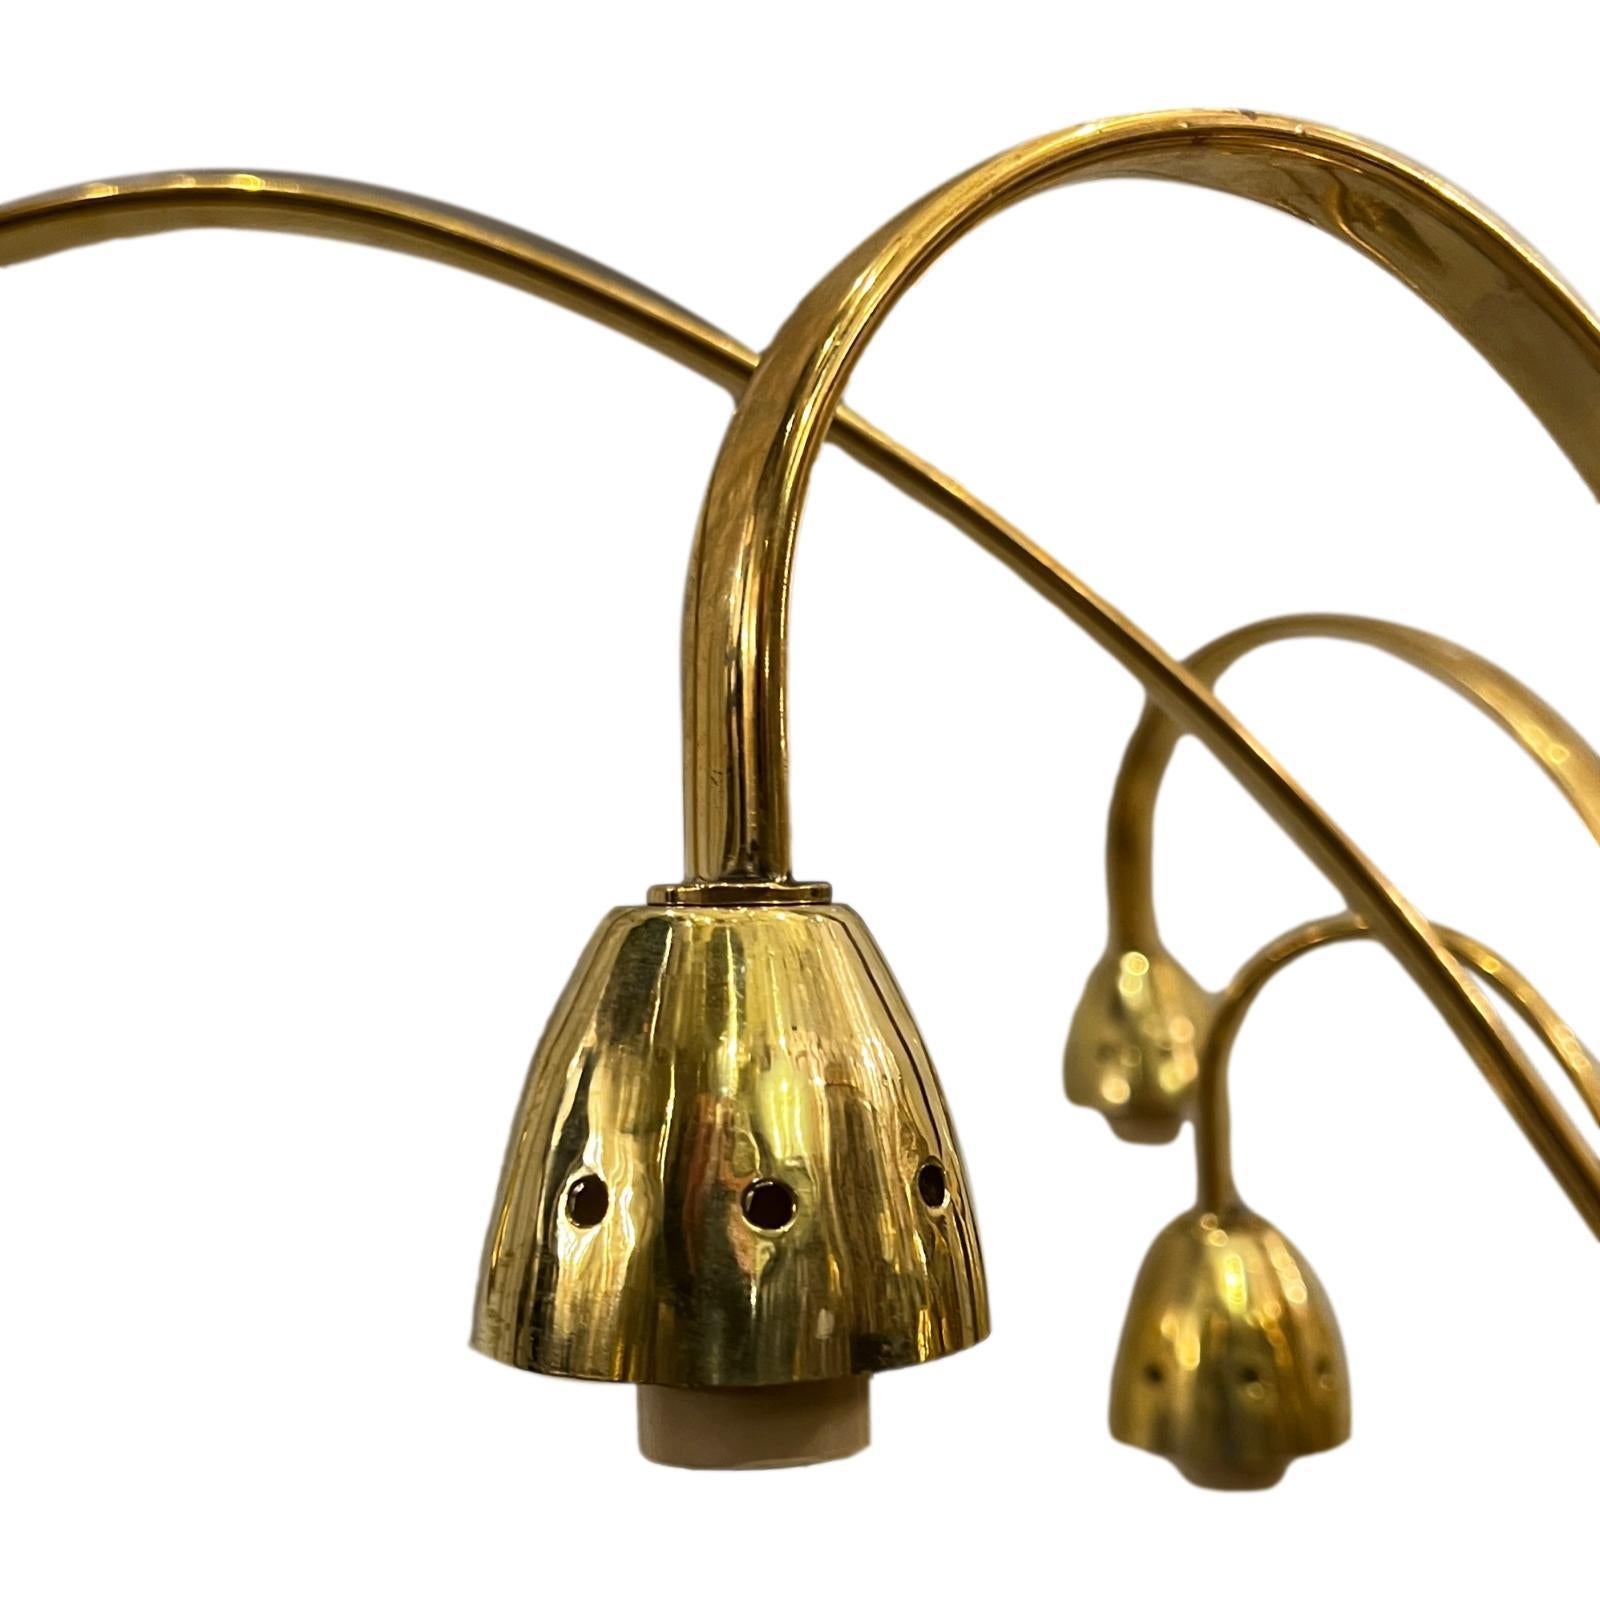 A circa 1960's French polished bronze chandelier with 12 lights.

Measurements:
Current drop: 28